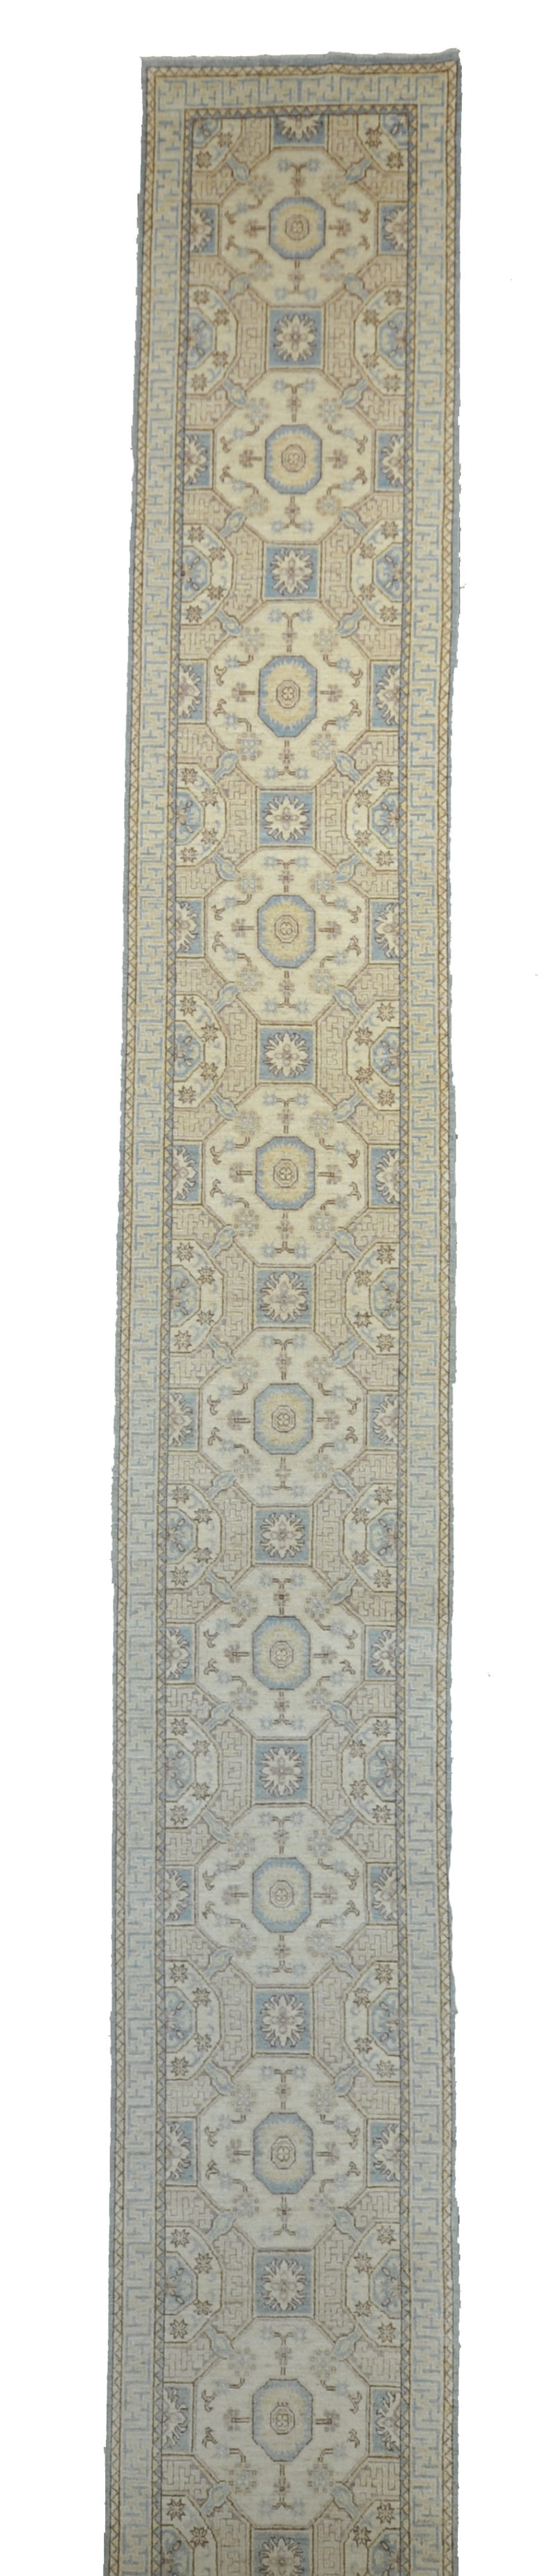 Ziegler & Co Oushak rugs and more oriental carpet -